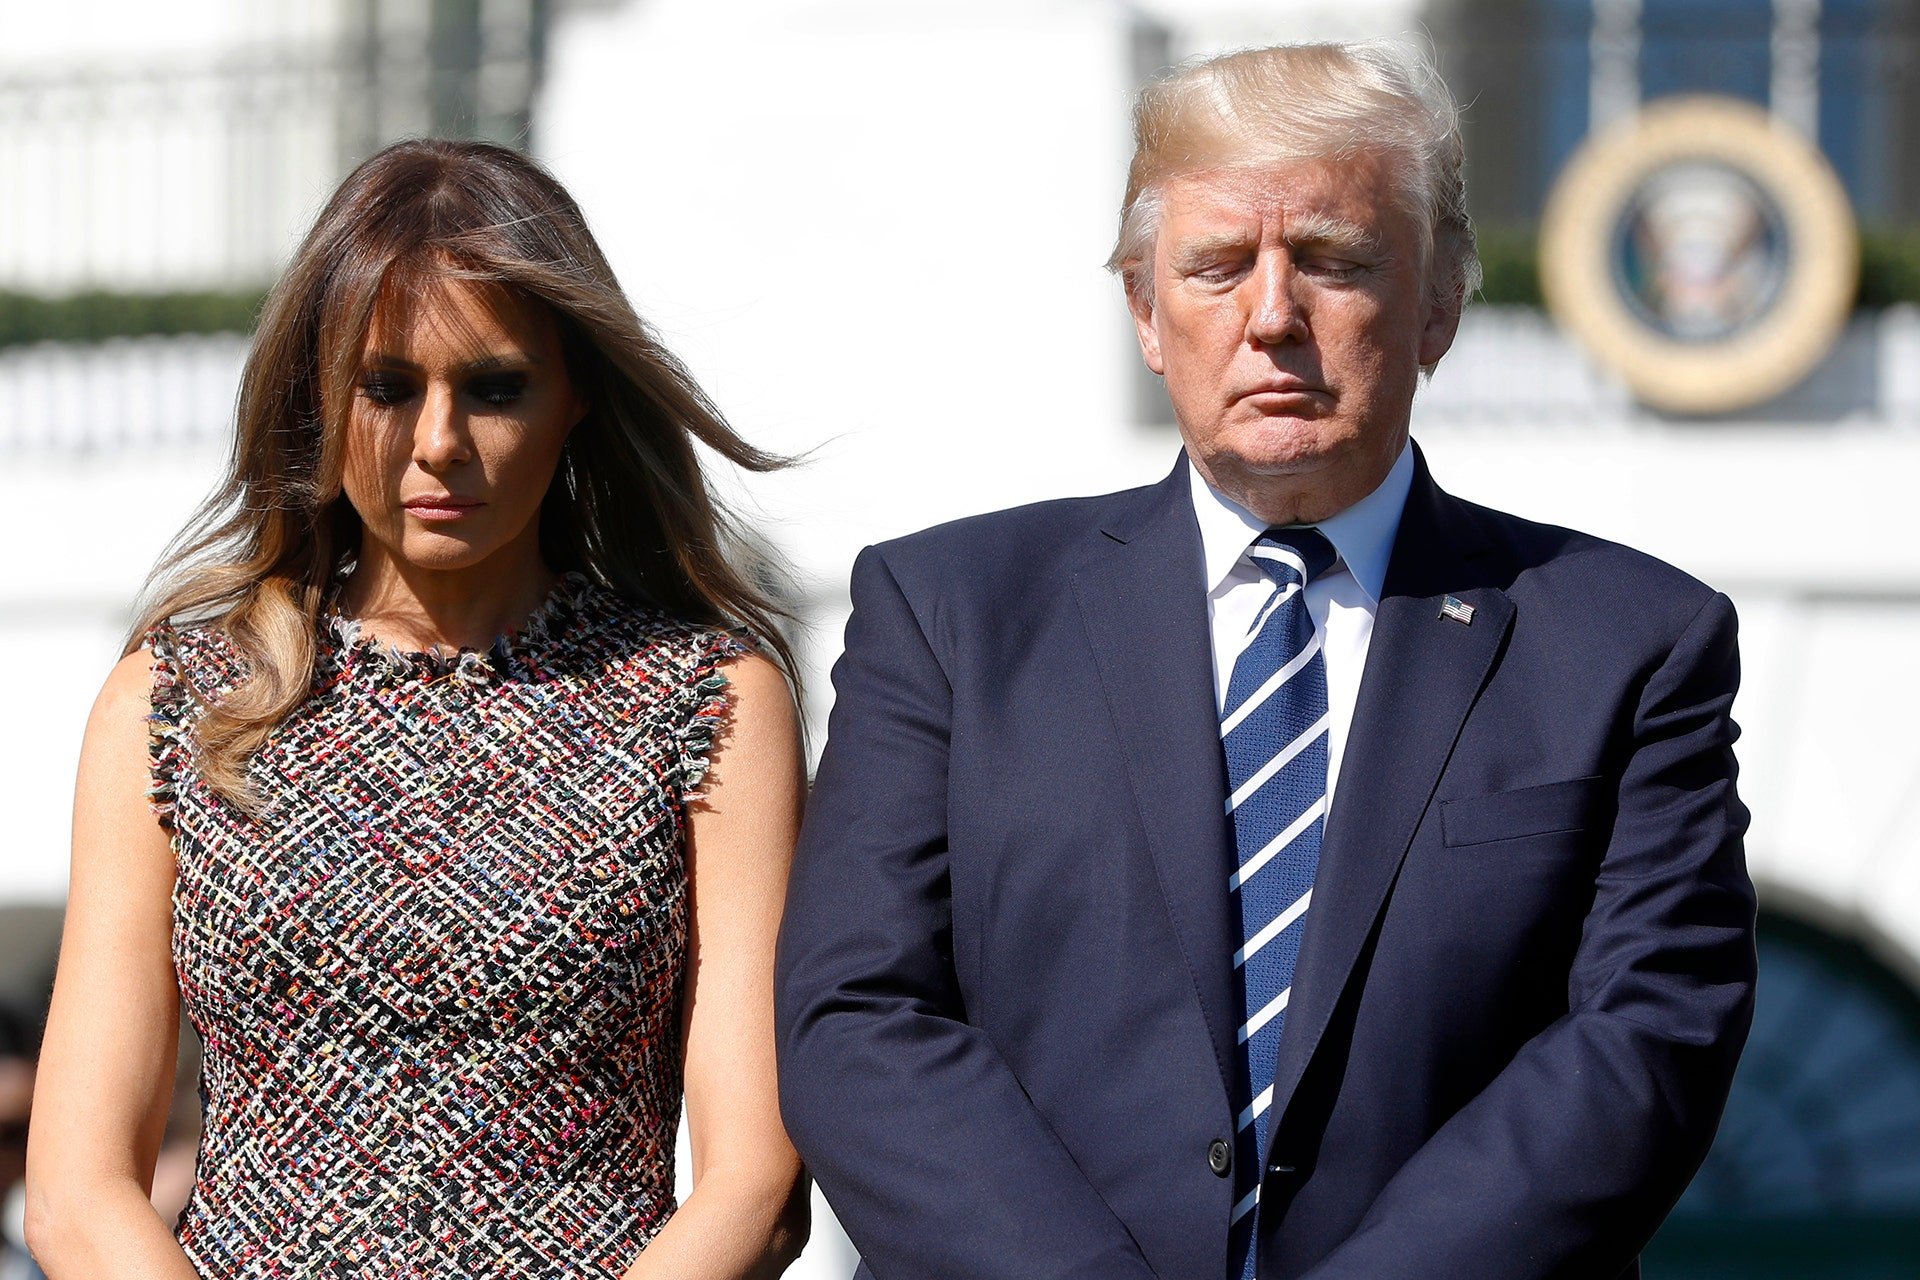 FBI searched Melania’s wardrobe, spent hours in Trump’s private office during Mar-a-Lago raid